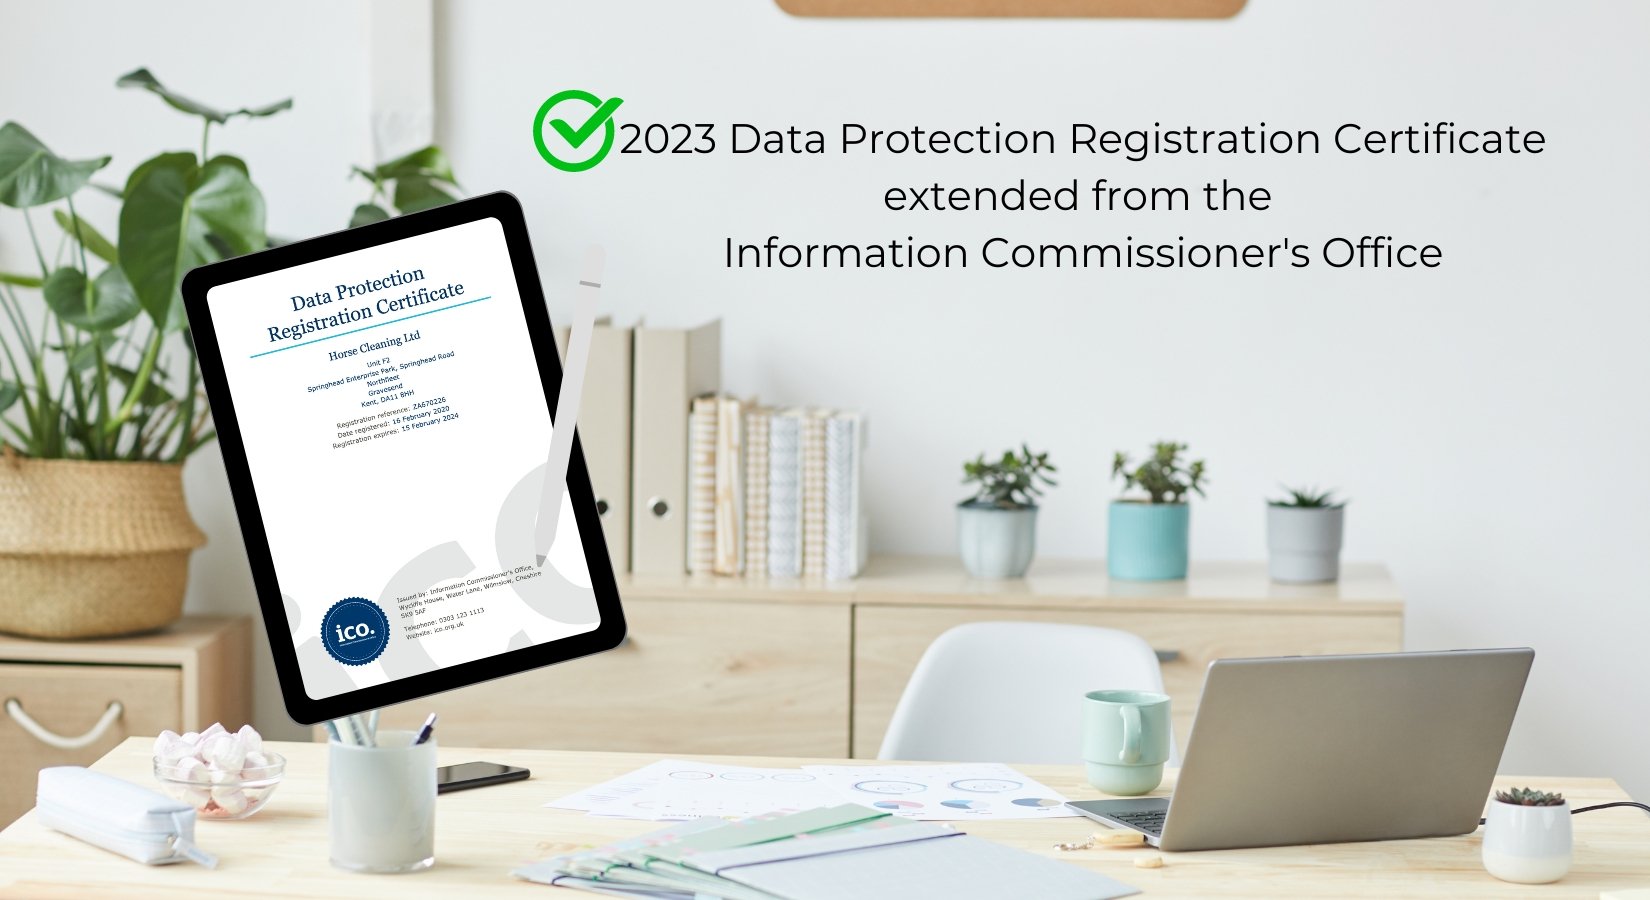 Equestrian businesses data protection obligations